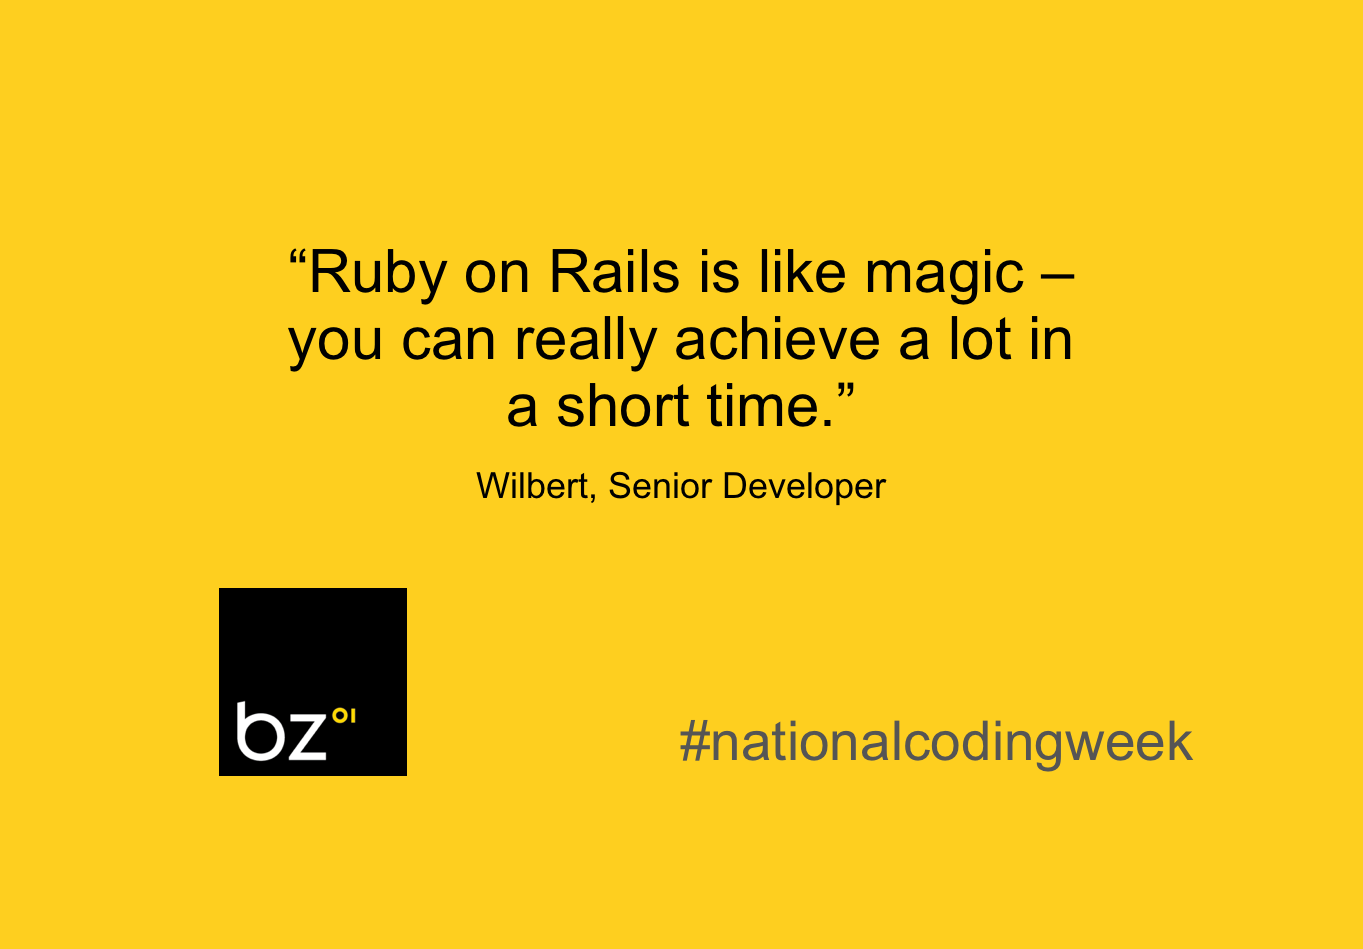 "Ruby on Rails is like magic – you can really achieve a lot in a short time."